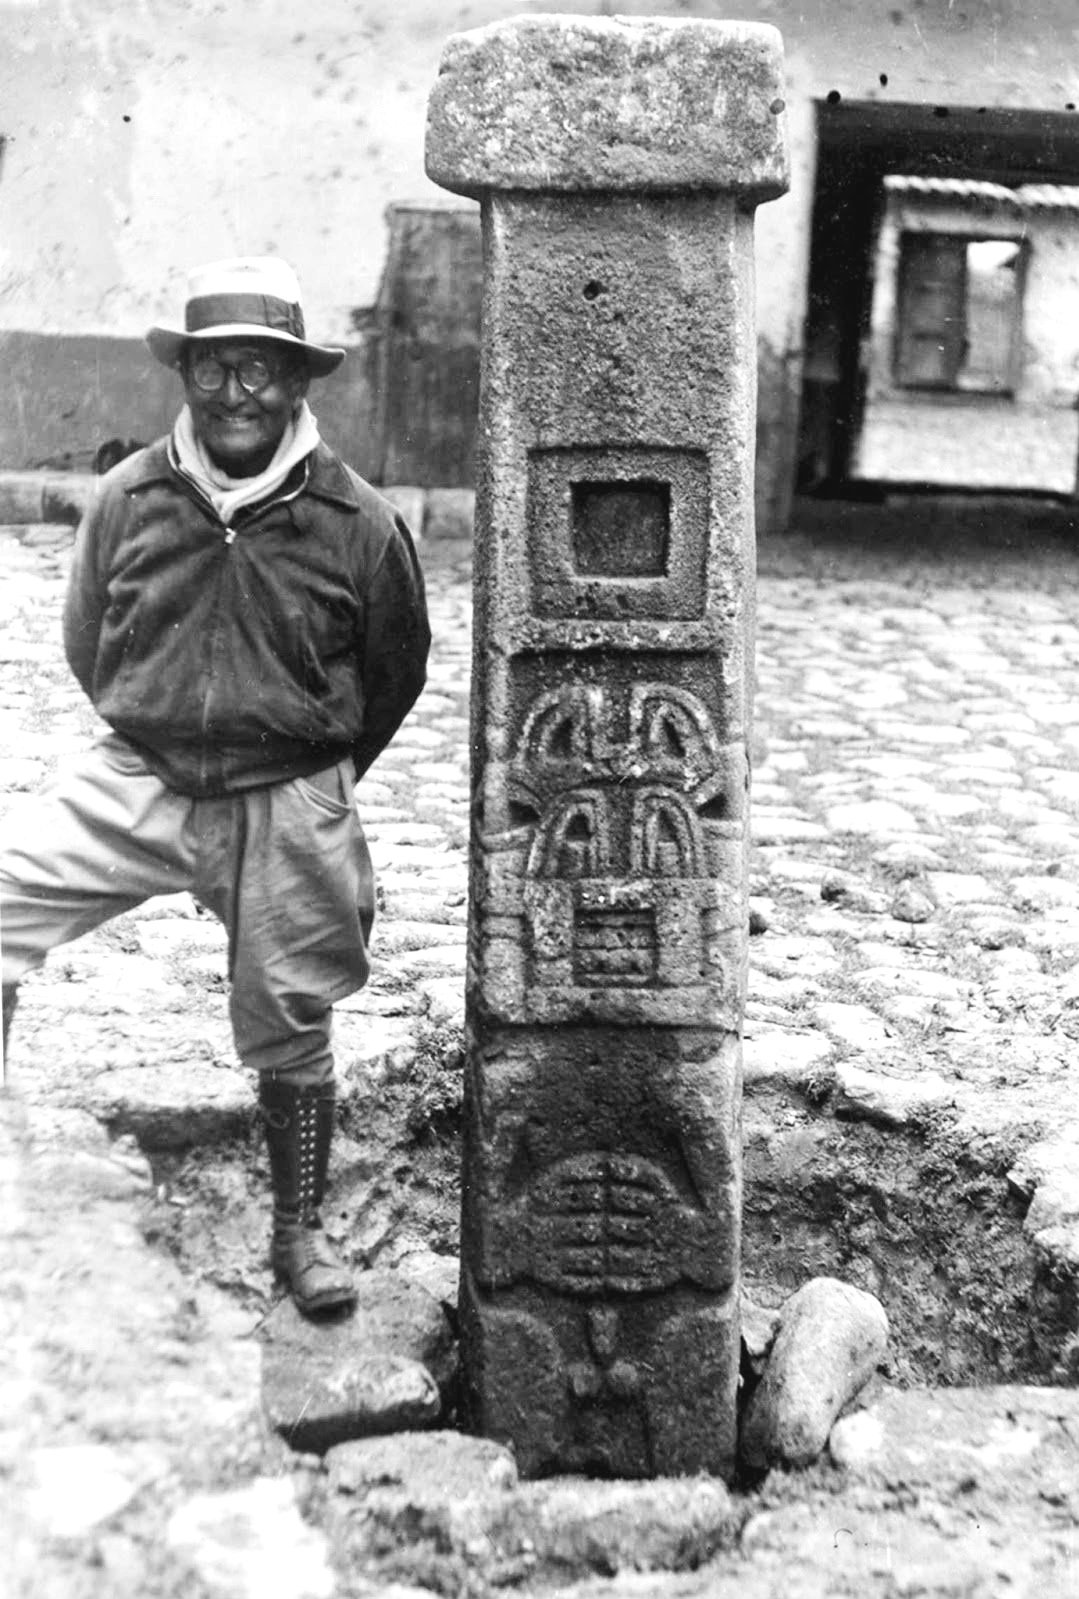  Dr. Julio César Tello, known as the “father of Peruvian archaeology” 